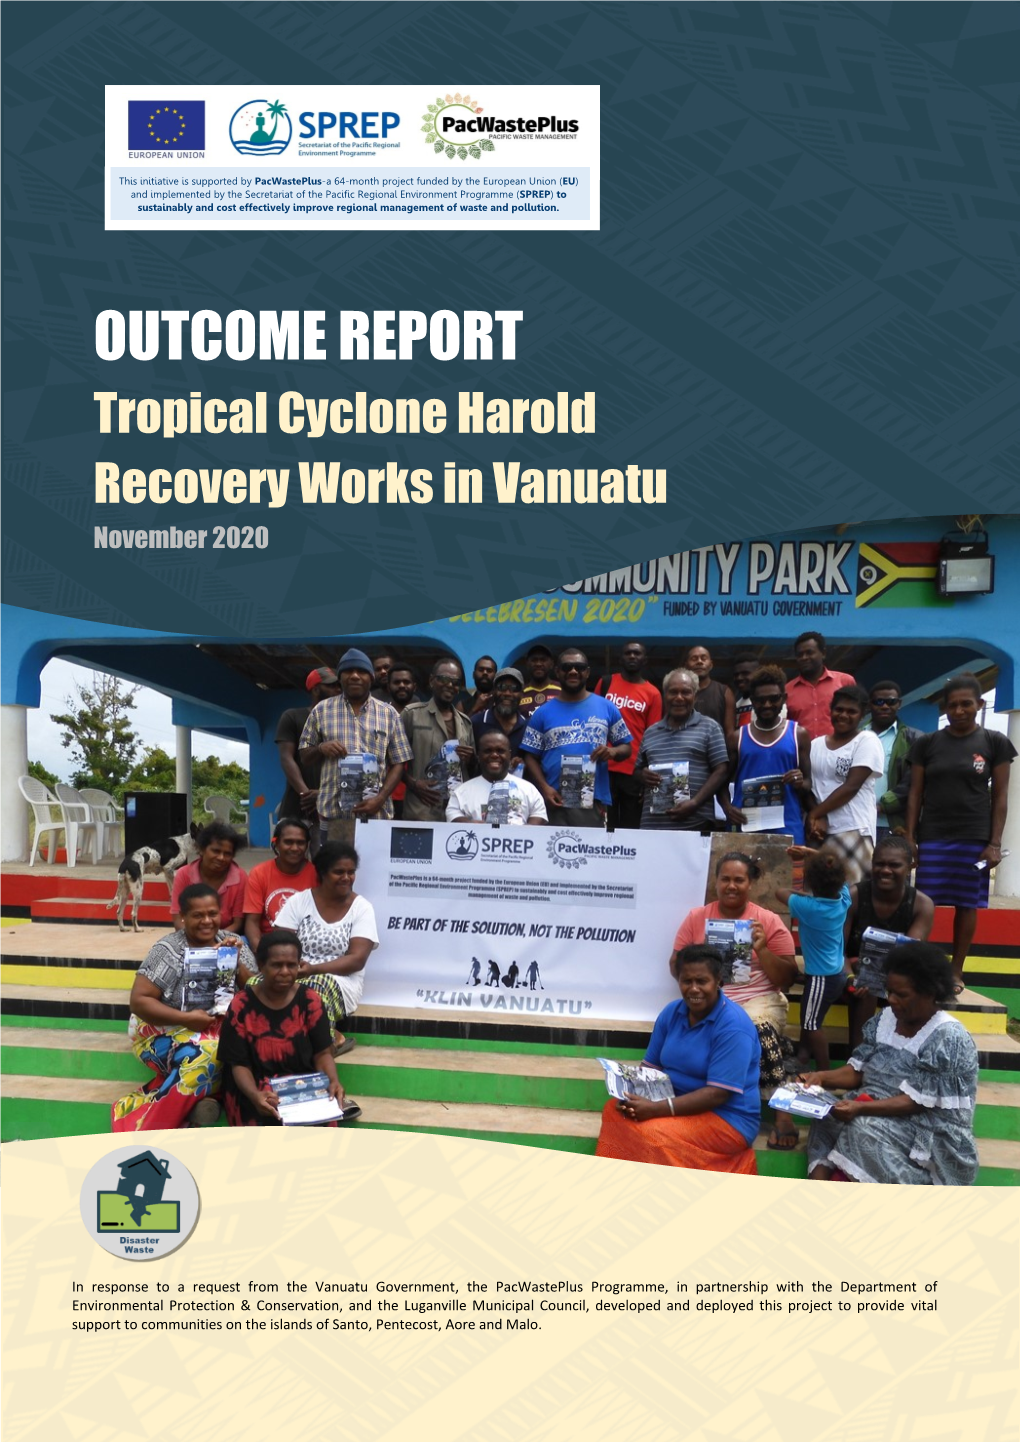 Download Tropical Cyclone Harold Recovery Works Outcome Report